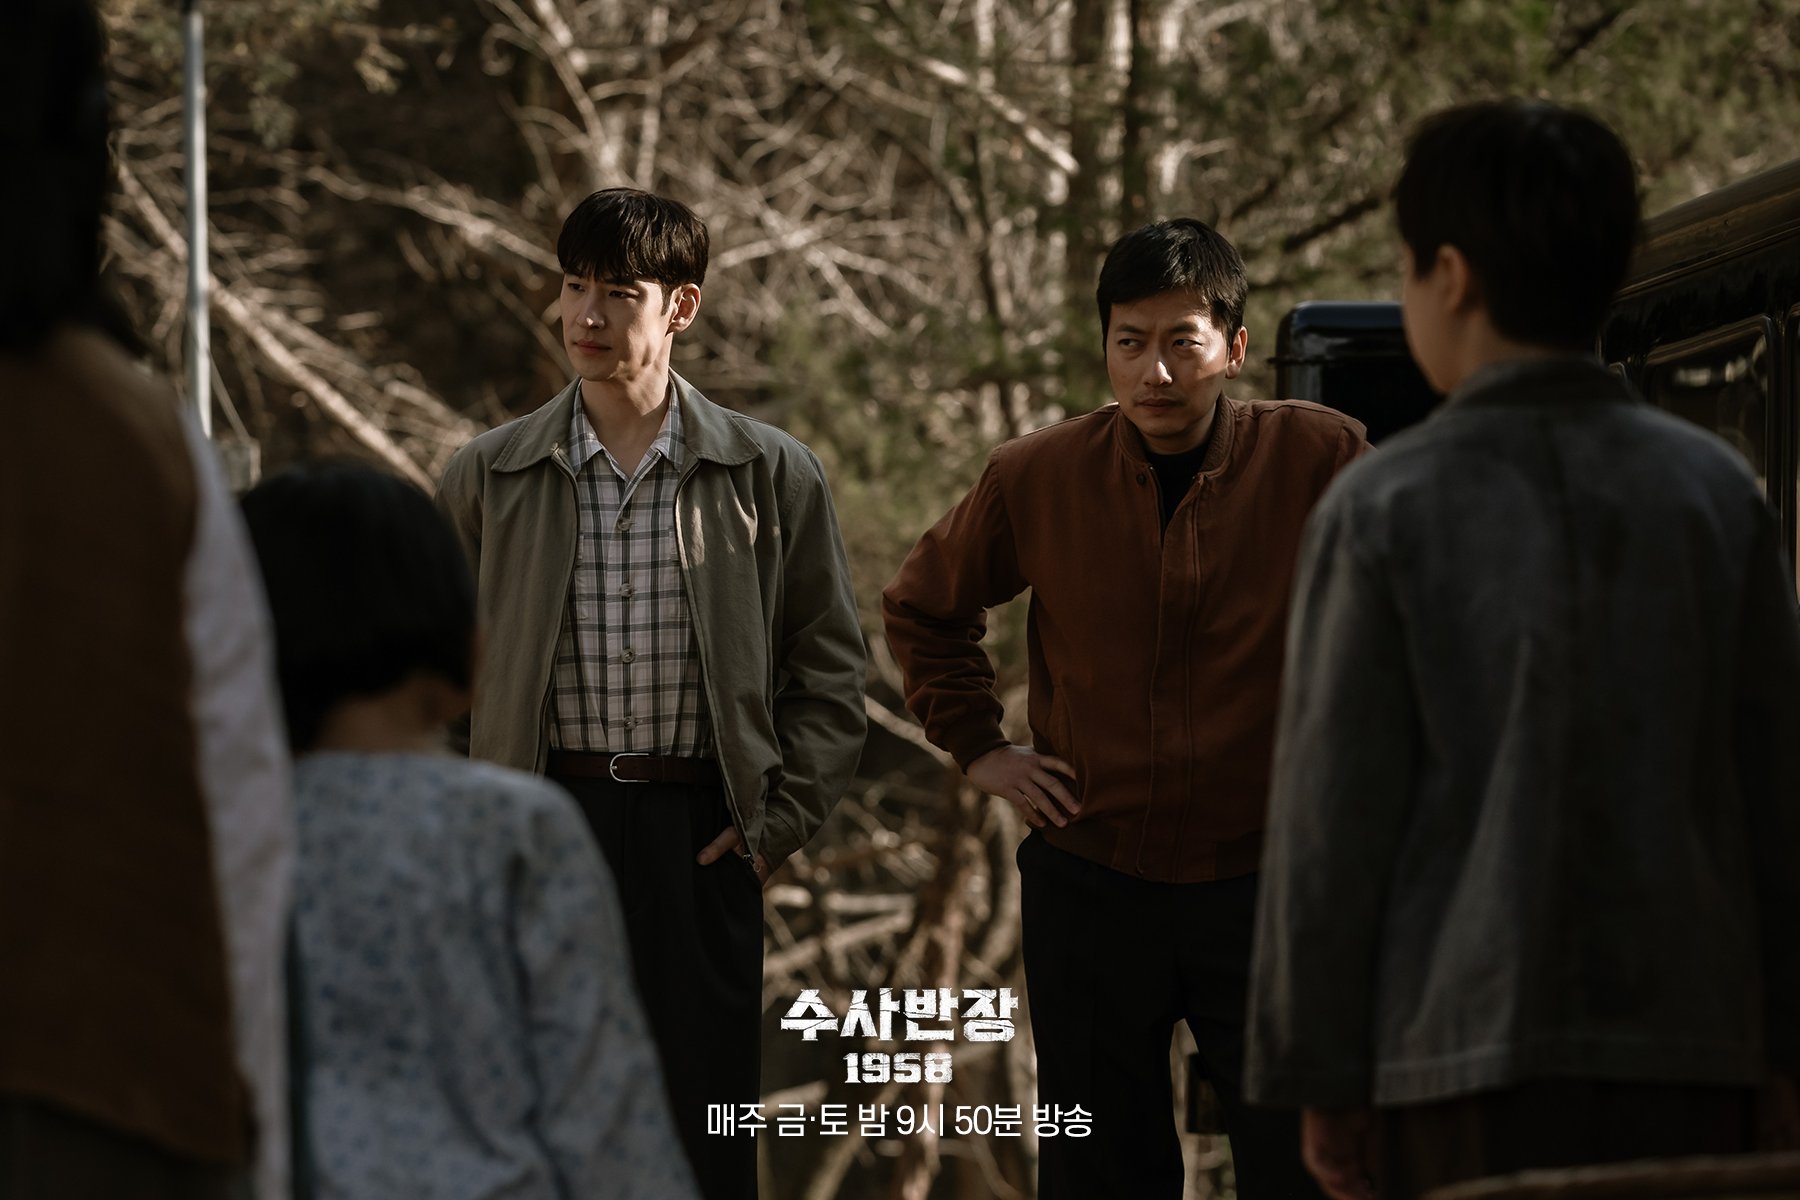 Lee Je Hoon And Lee Dong Hwi Embark On Mission To Find Missing Newborn In 